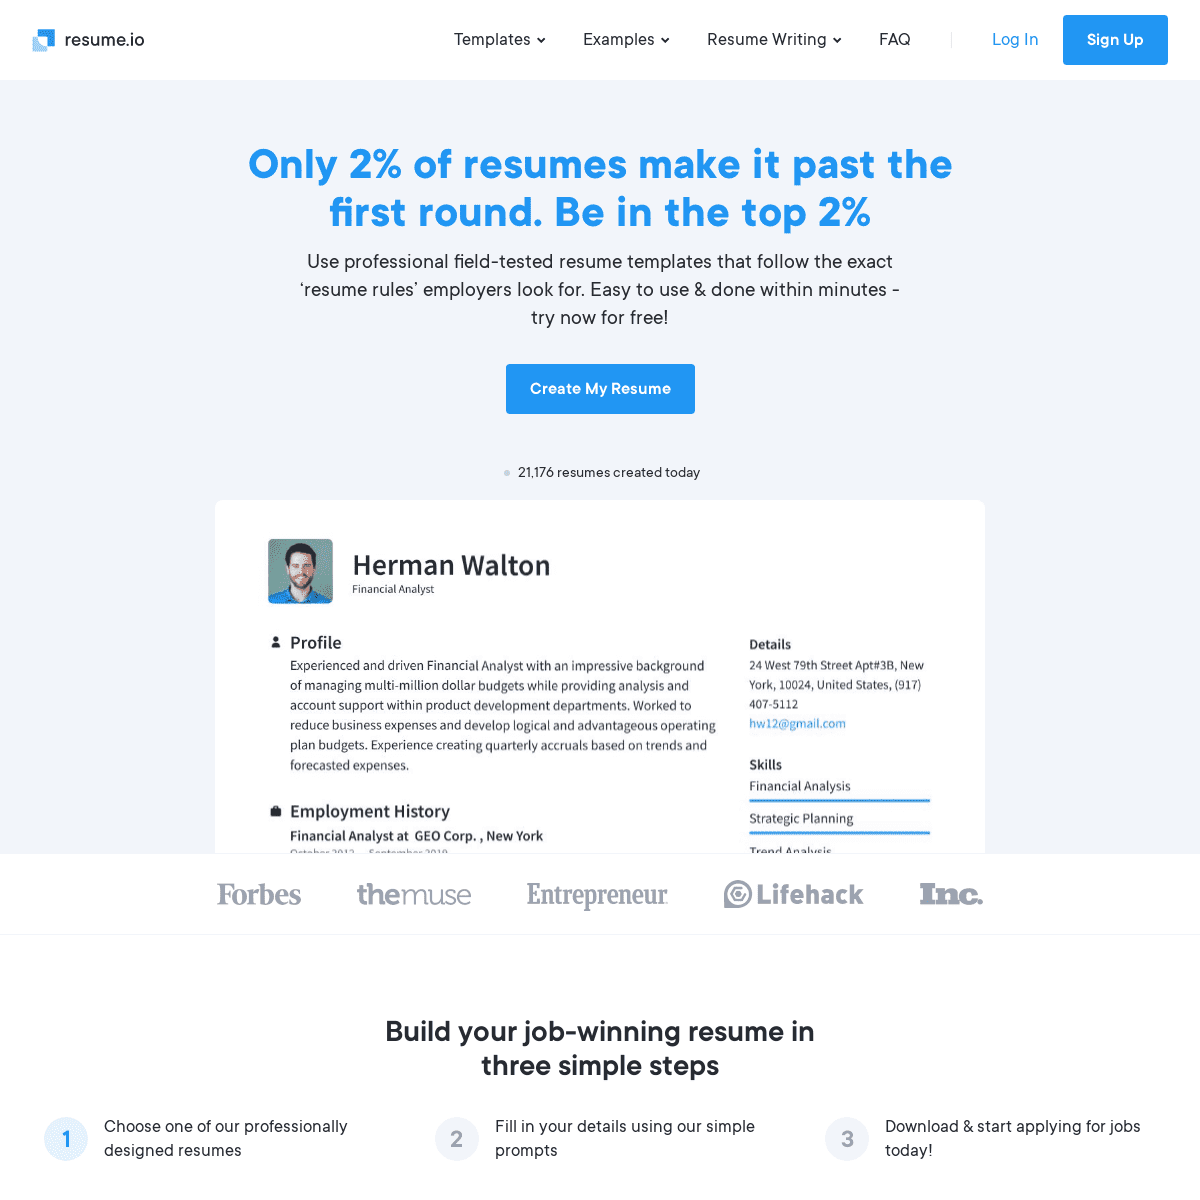 A complete backup of resume.io